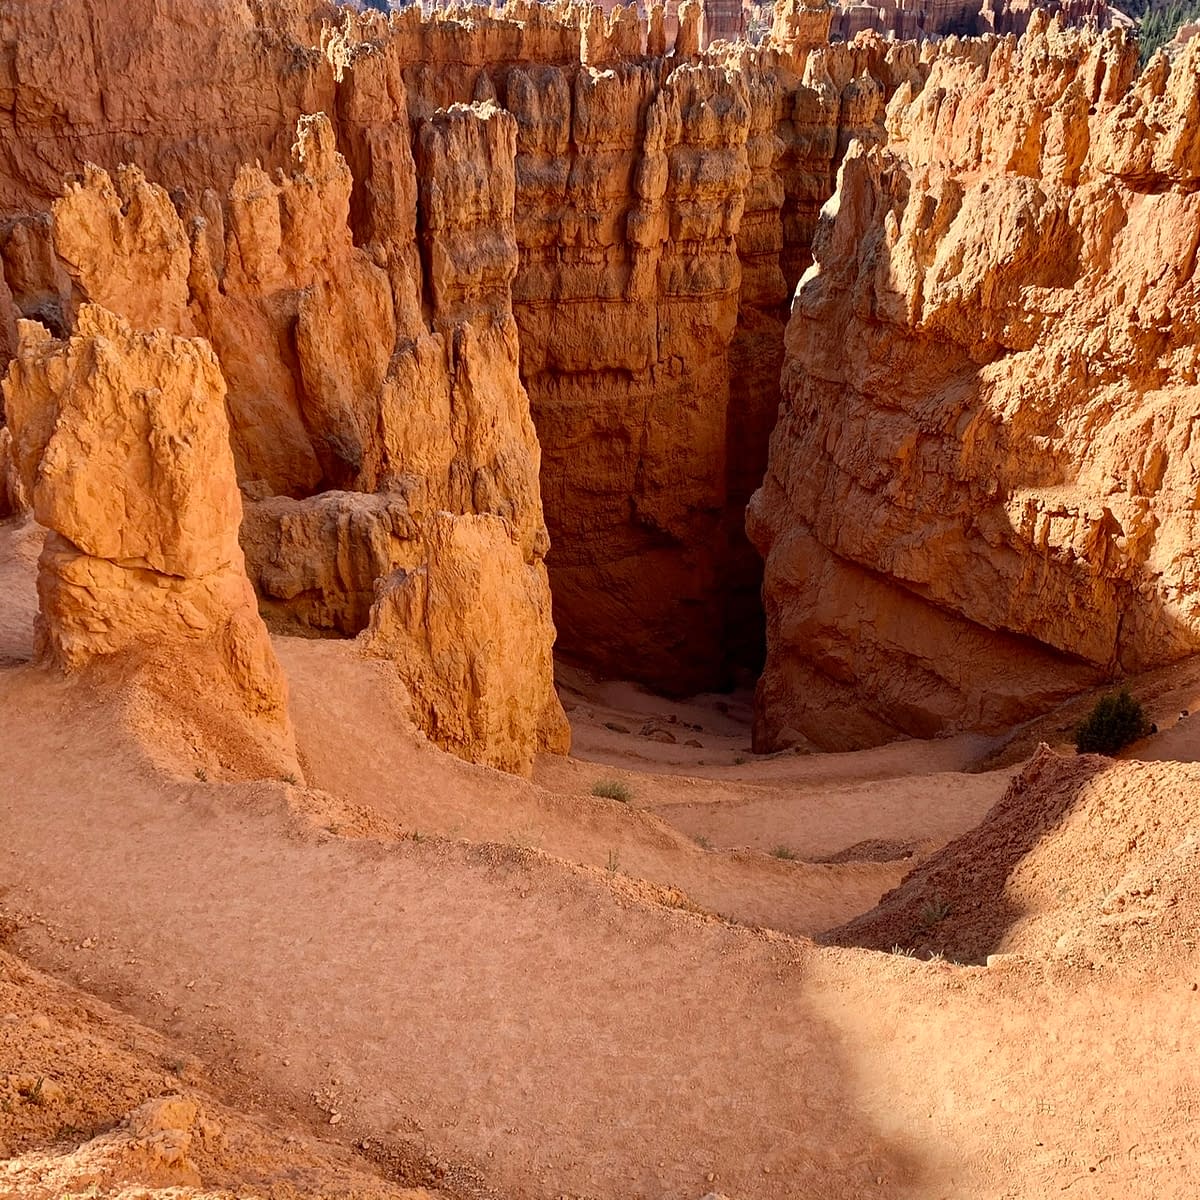 The Navajo Loop Trail in Bryce Canyon